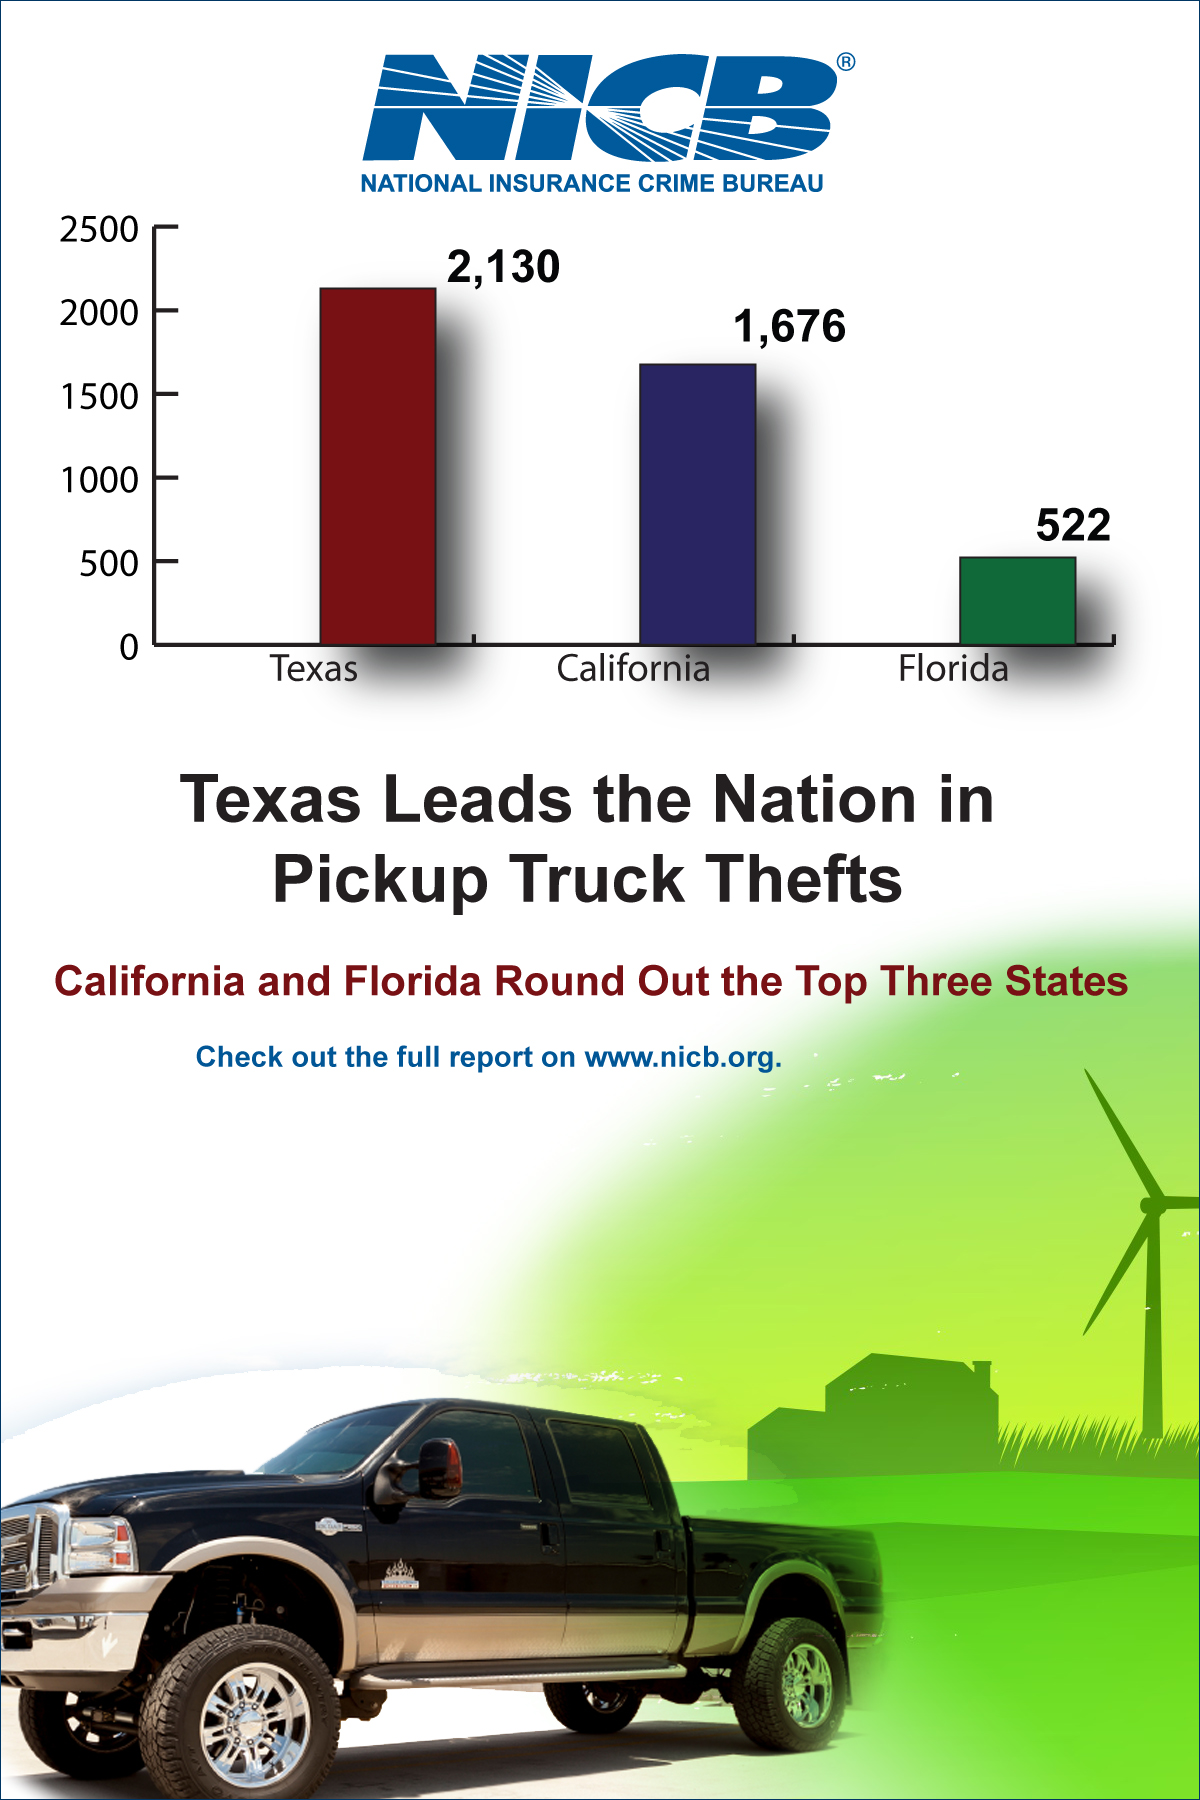 Texas Leads the Nation in Pickup Truck Thefts. #1: Texas - 2,130 #2: California - 1,676 #3: Florida - 522